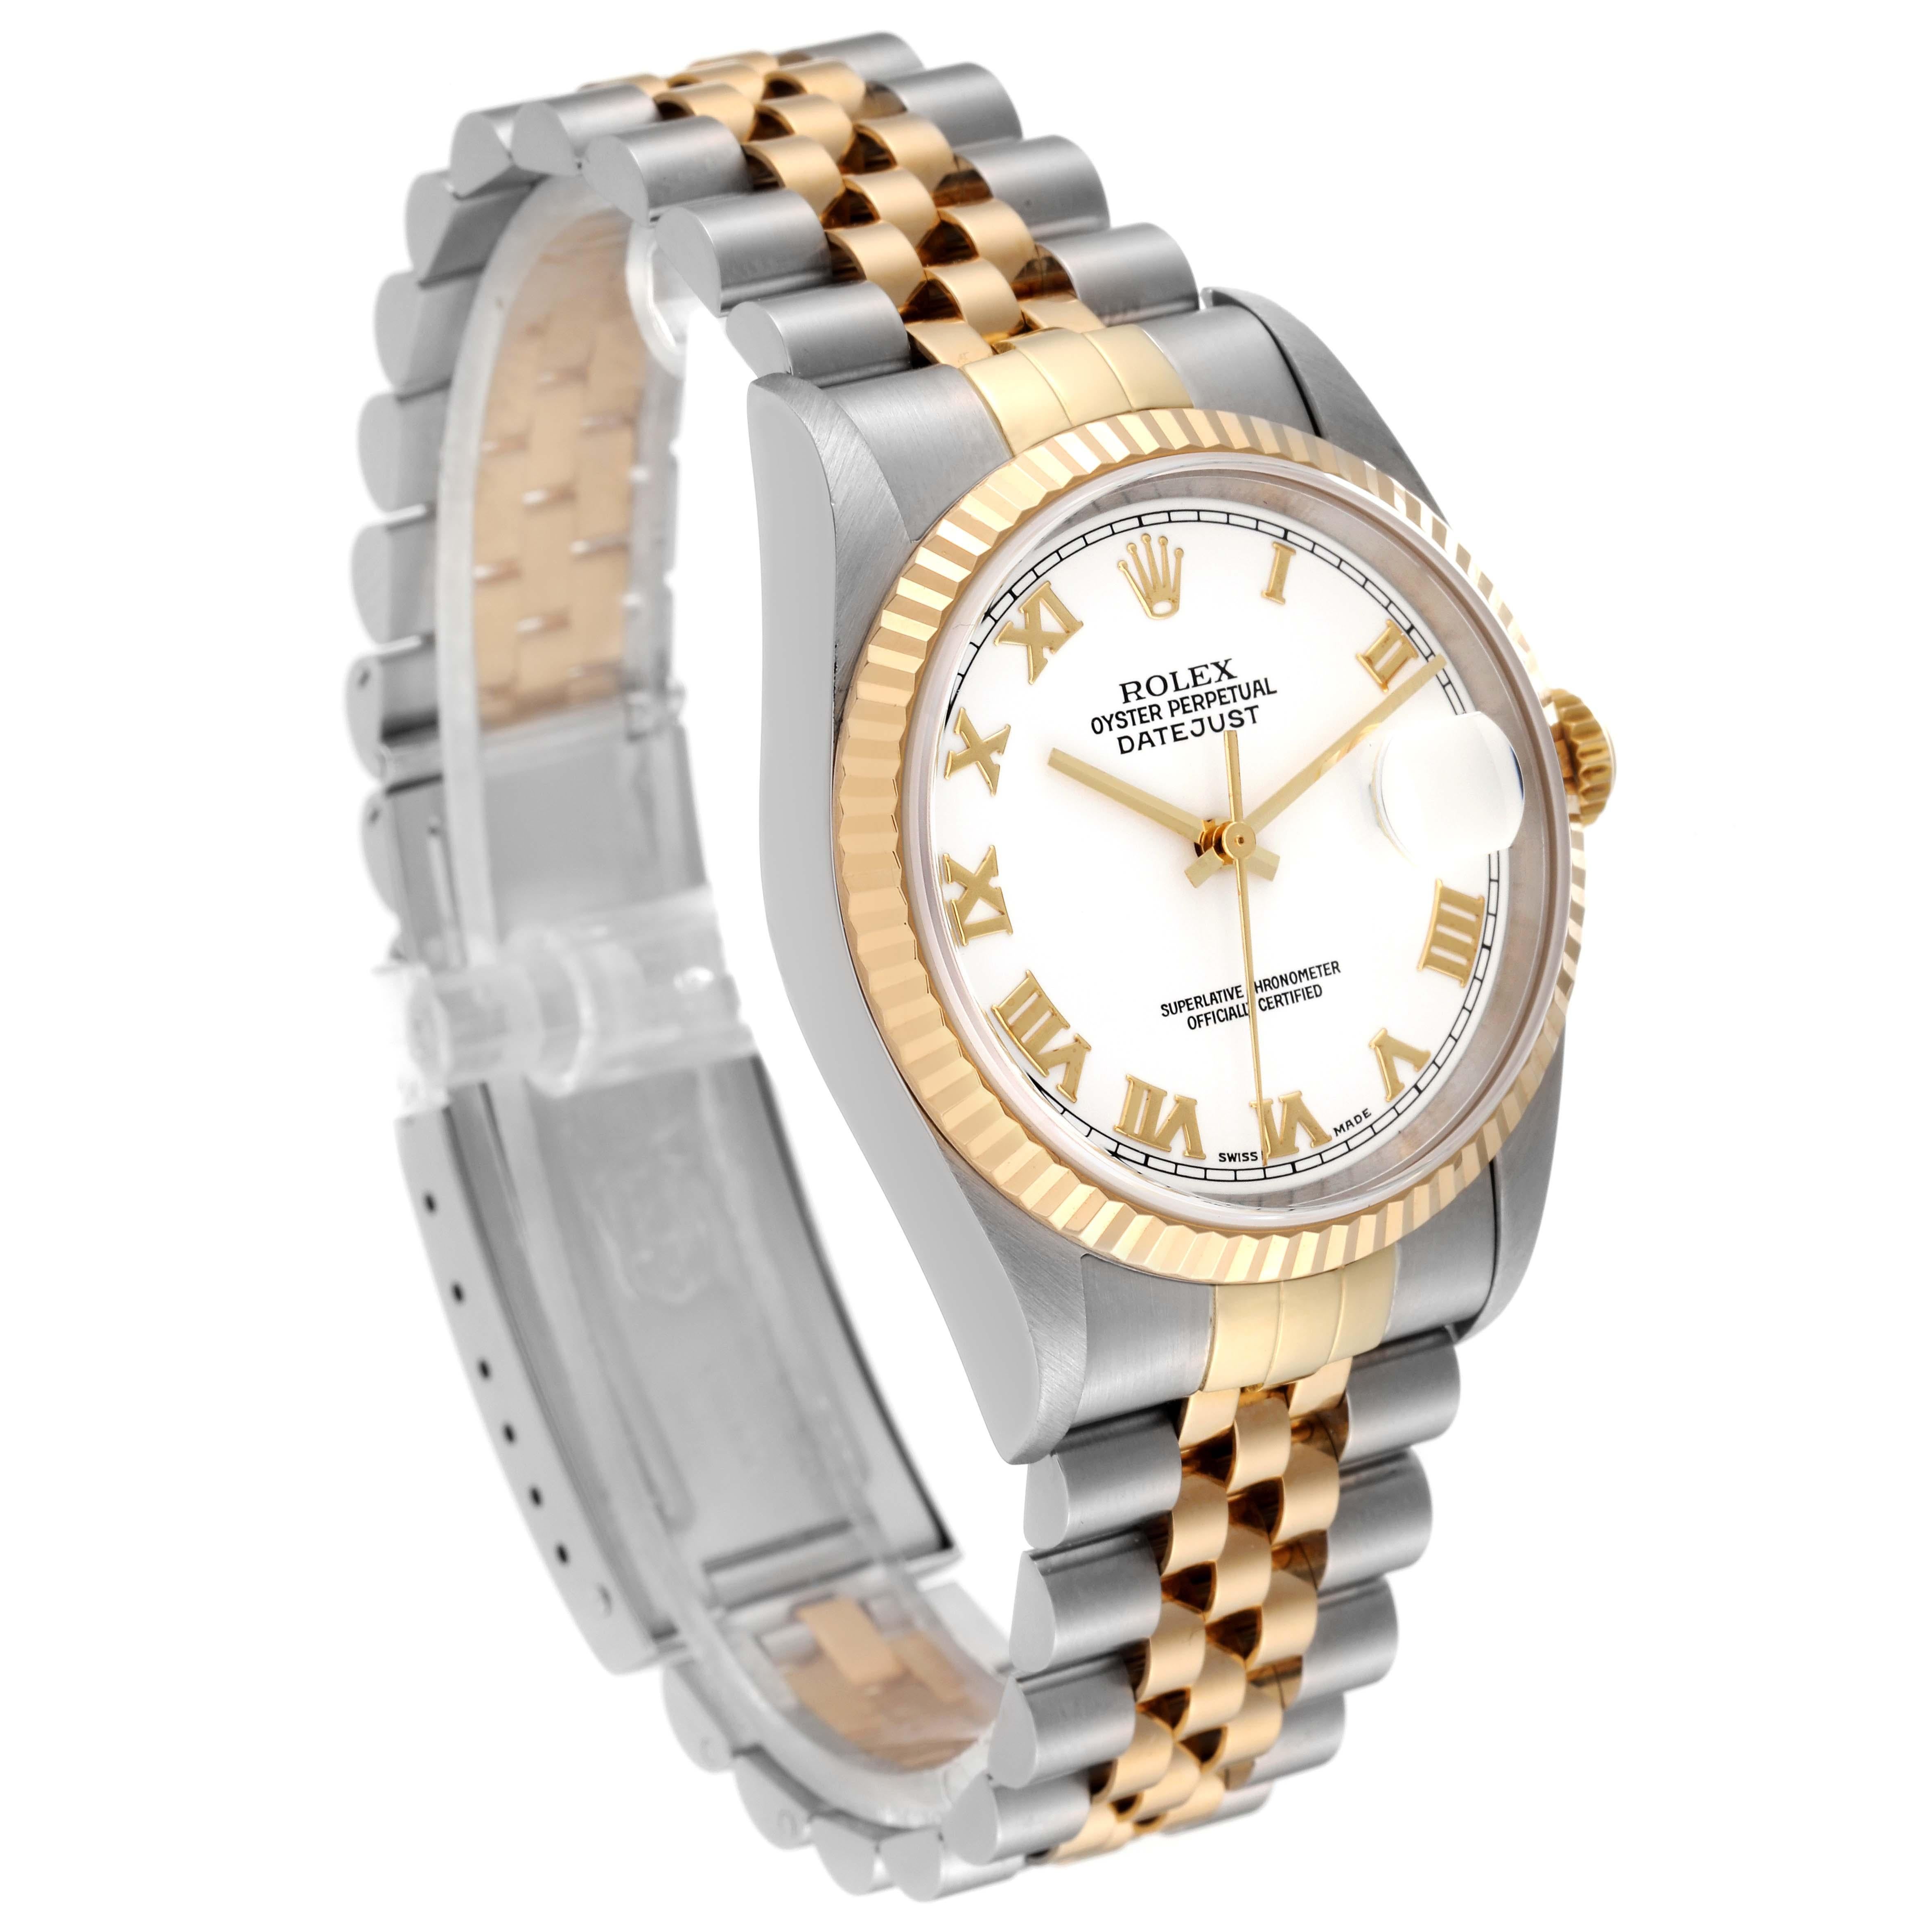 Rolex Datejust Steel Yellow Gold White Dial Mens Watch 16233 1